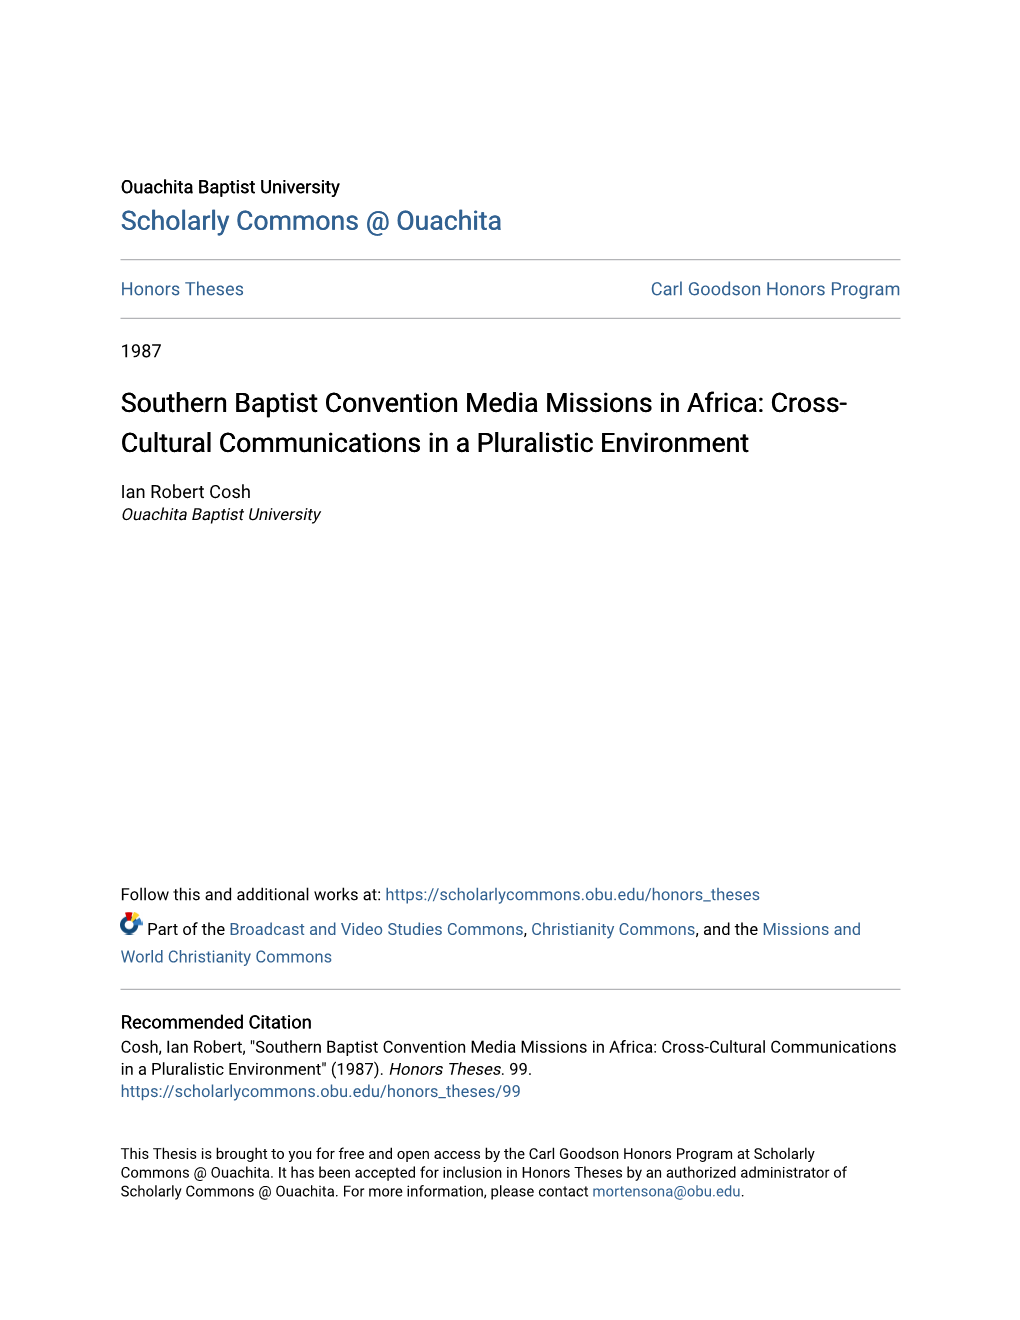 Southern Baptist Convention Media Missions in Africa: Cross-Cultural Communications in a Pluralistic Environment" (1987)